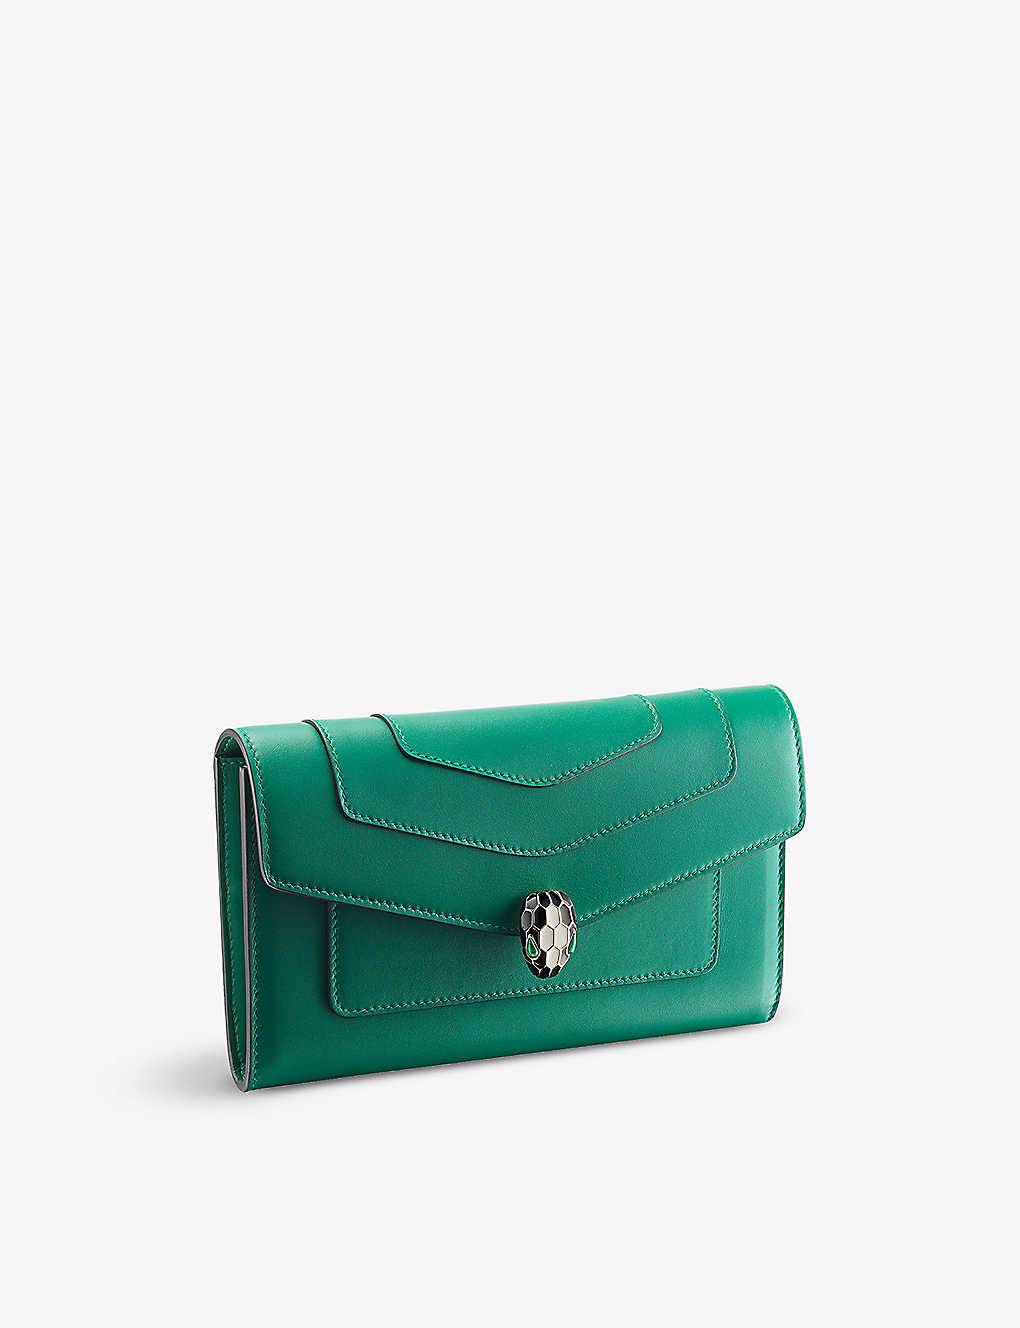 Bvlgari Serpenti Forever Leather Wallet In Green